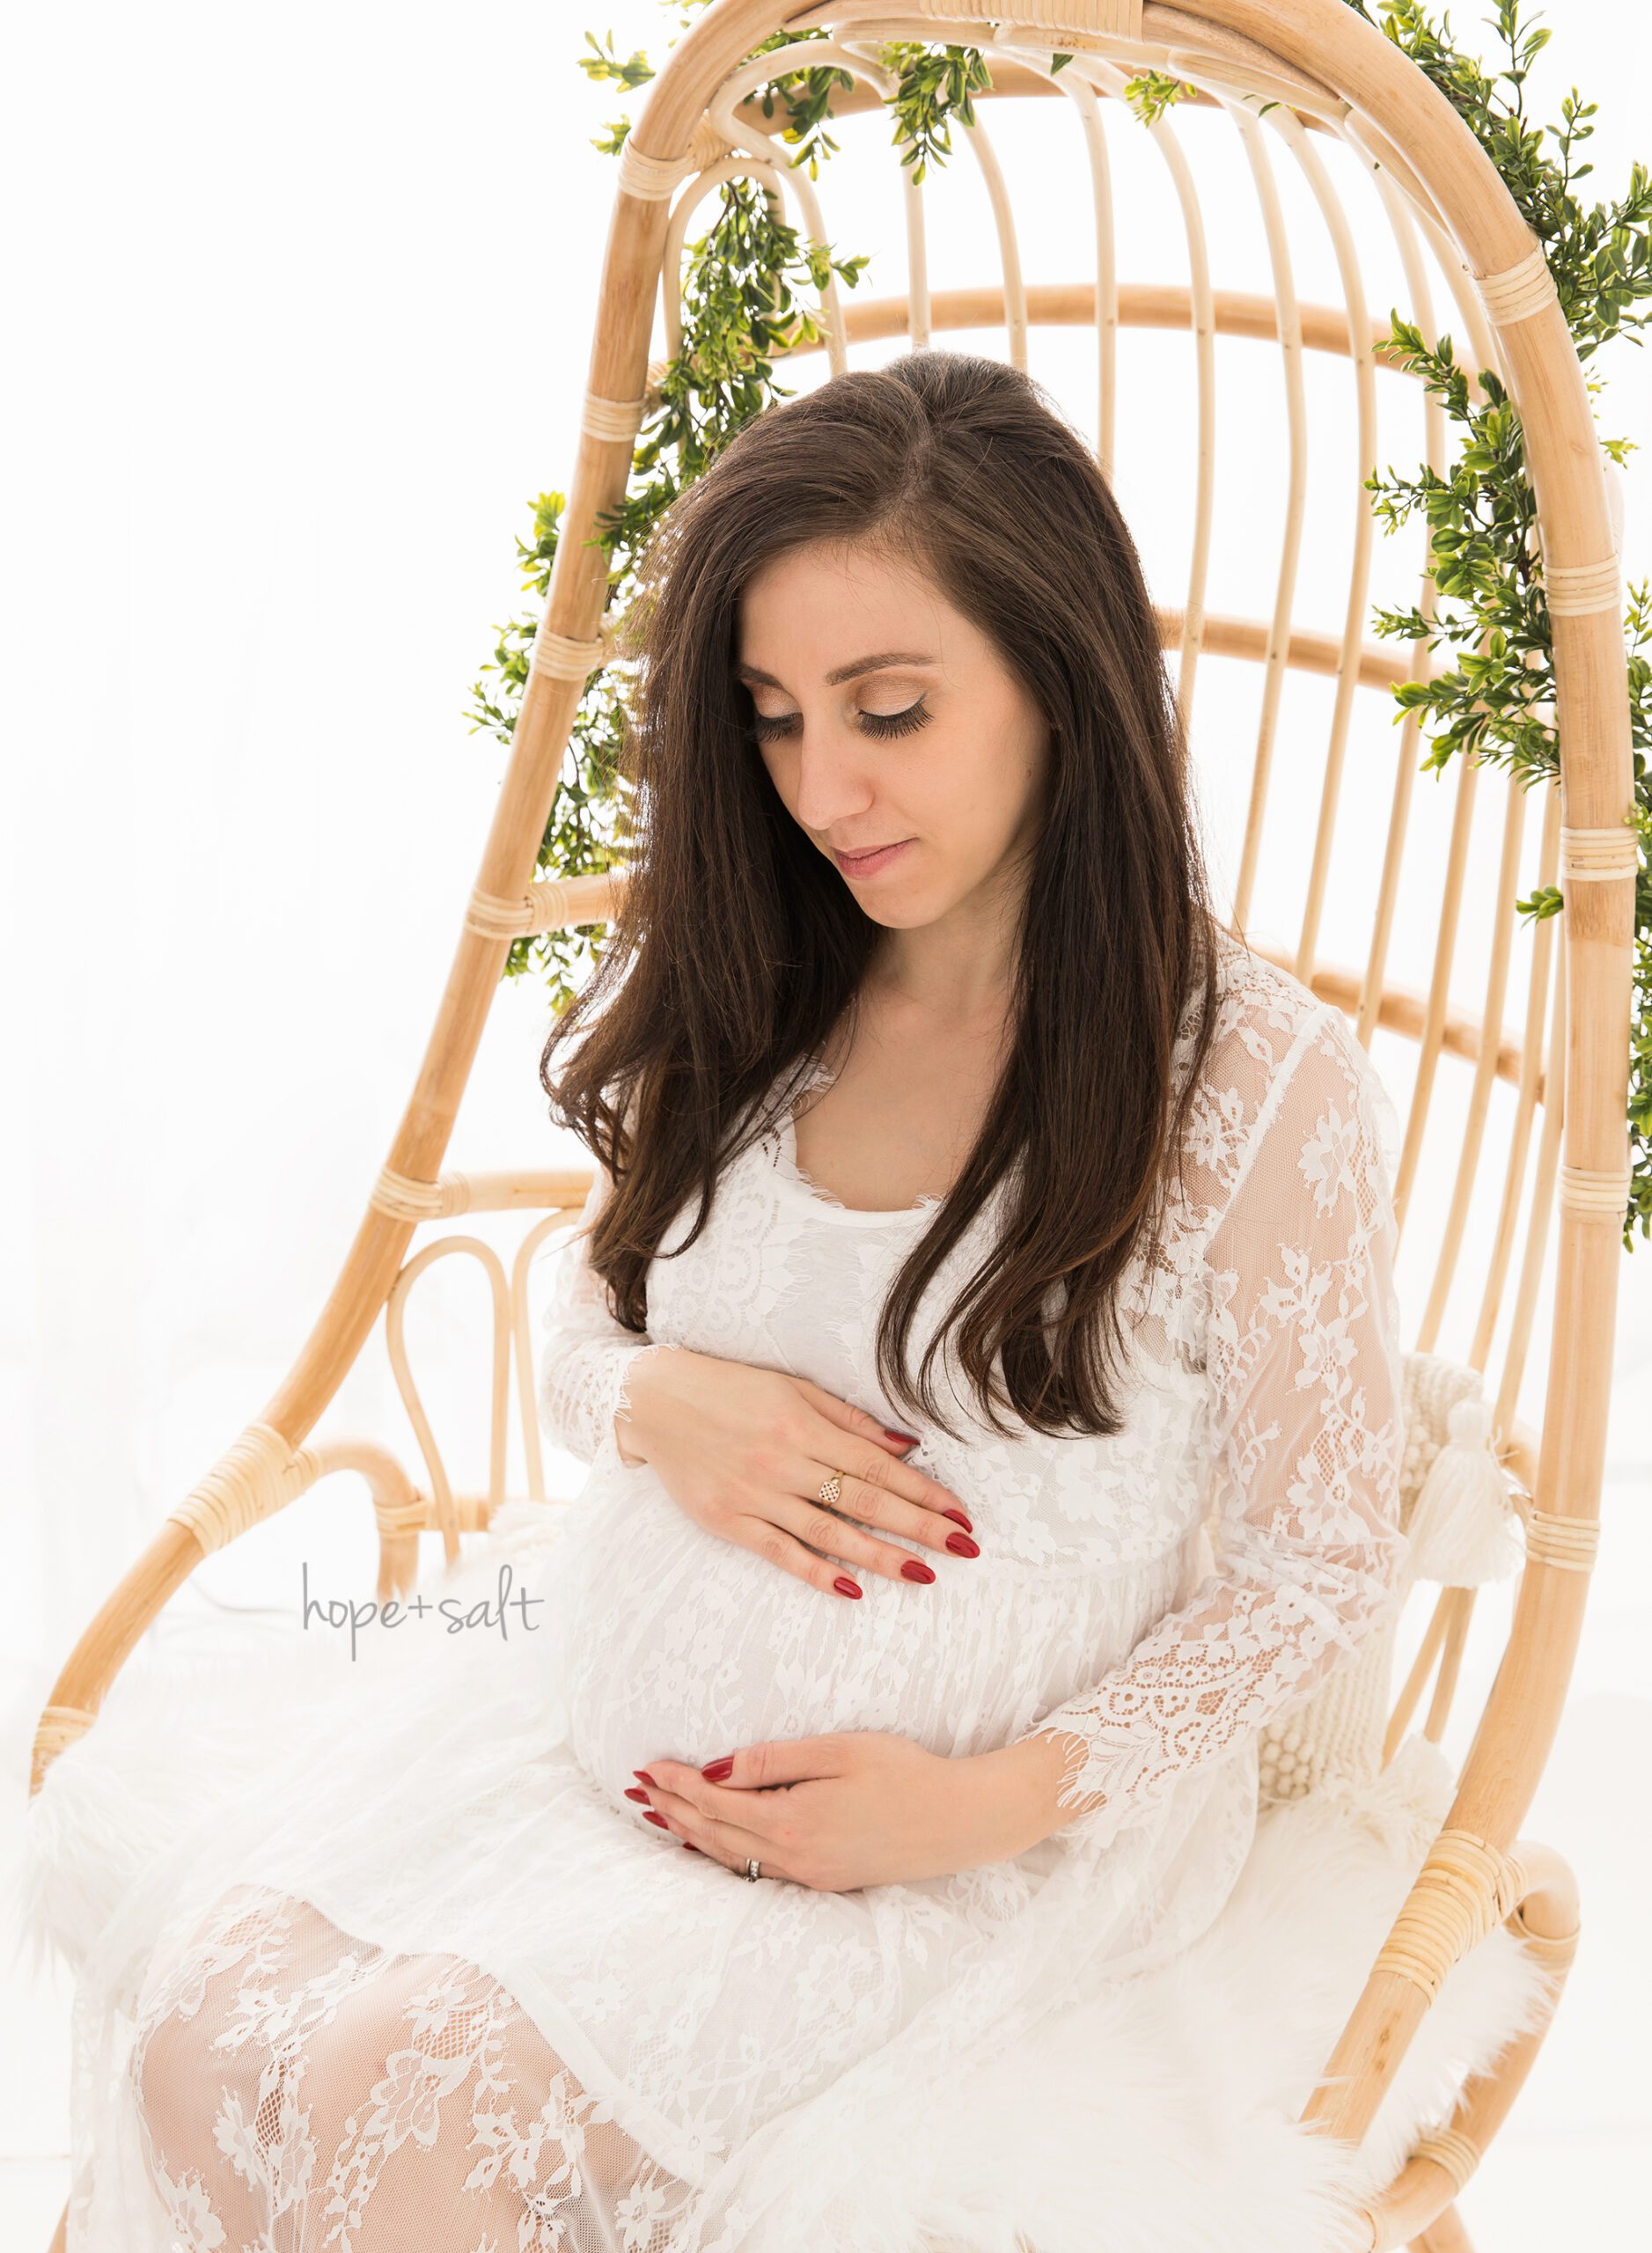 boho studio maternity session expecting mama in wicker egg cocoon chair burlington photographer hope and salt